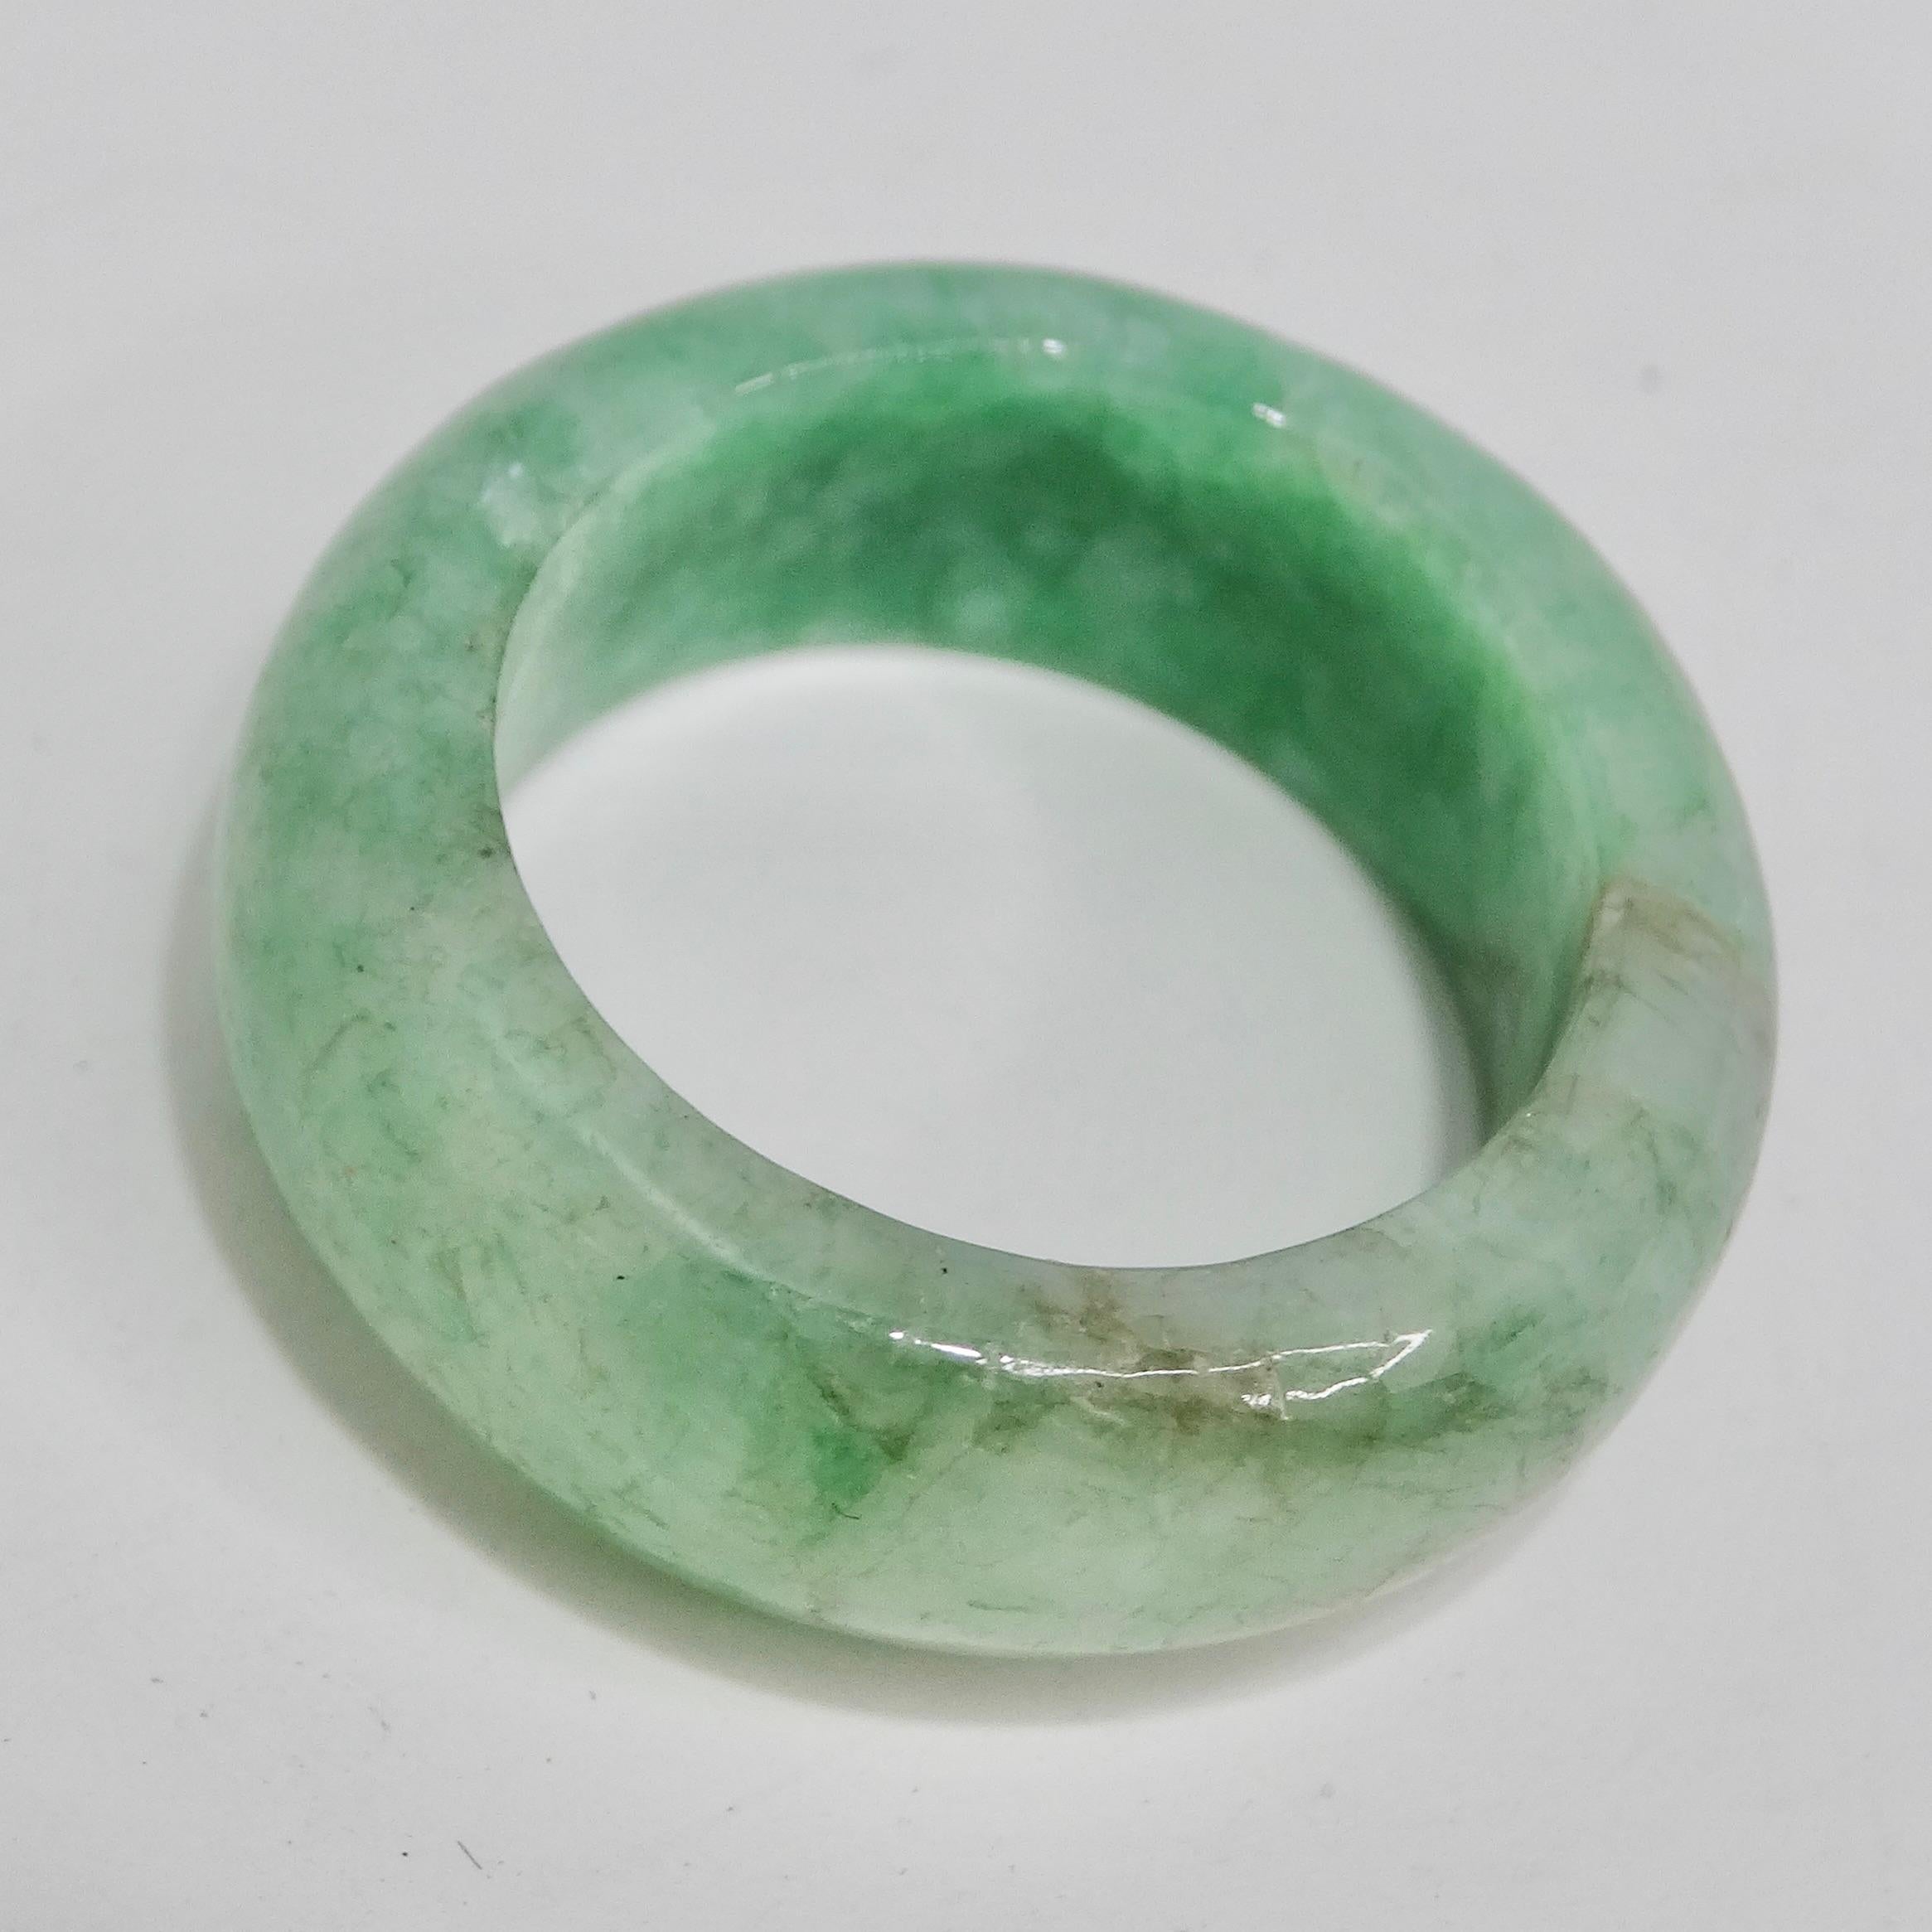 Discover the timeless beauty of our 1960s Jade Ring, a classic band ring showcasing the natural elegance of vibrant green jade. This exquisite piece, dating back to the 1960s, exudes a sense of grace and sophistication that transcends generations.